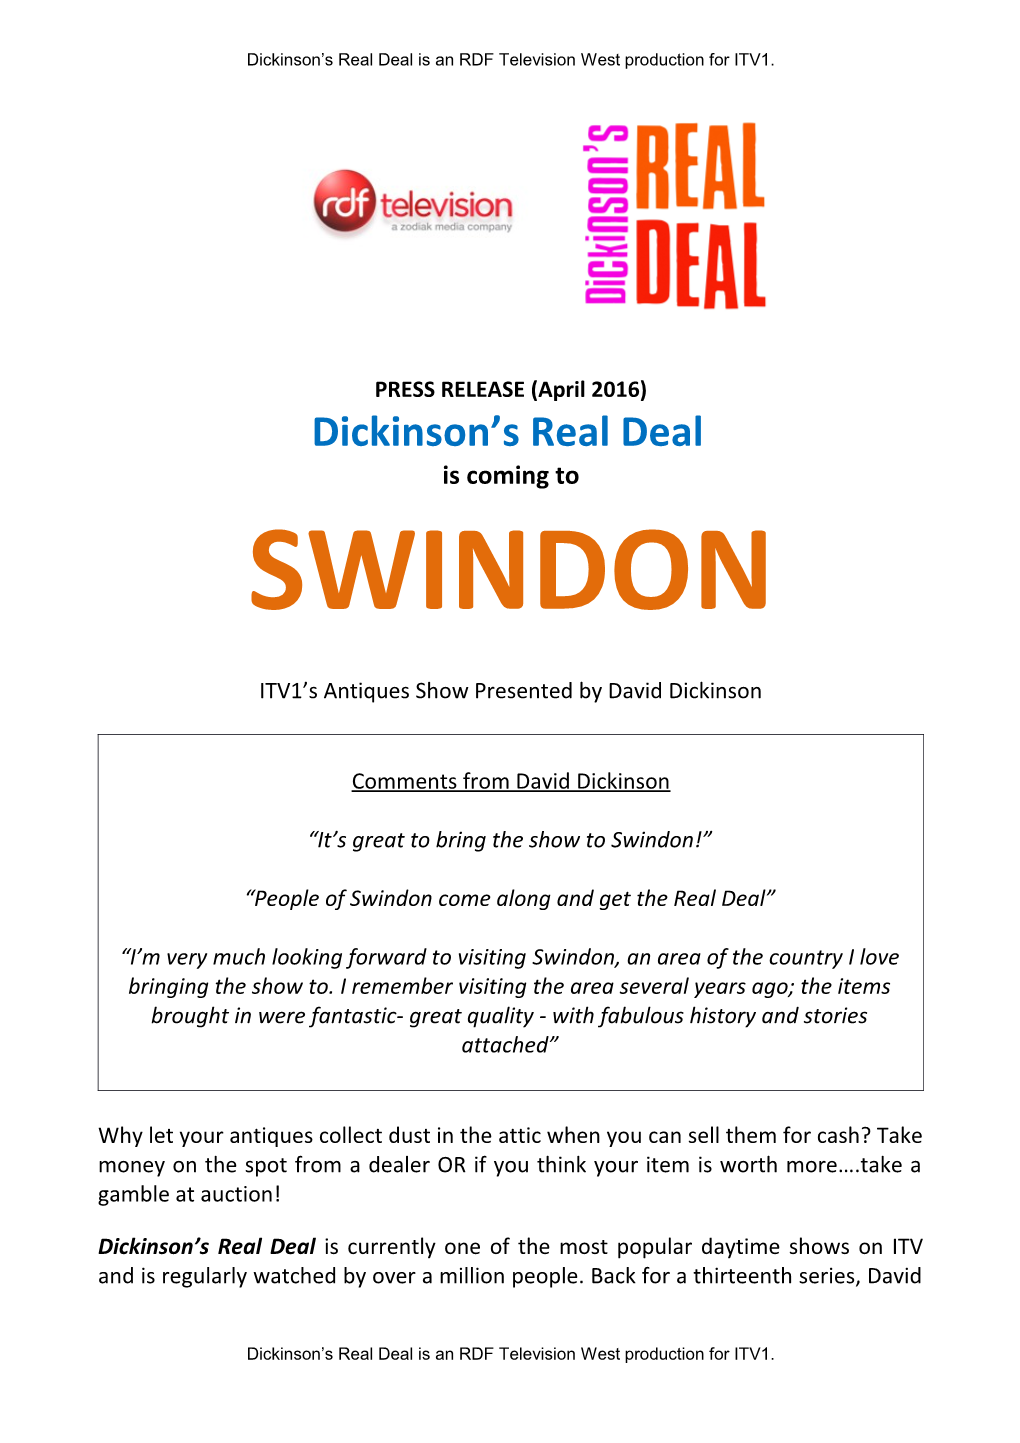 Dickinson S Real Deal Is an RDF Television West Production for ITV1